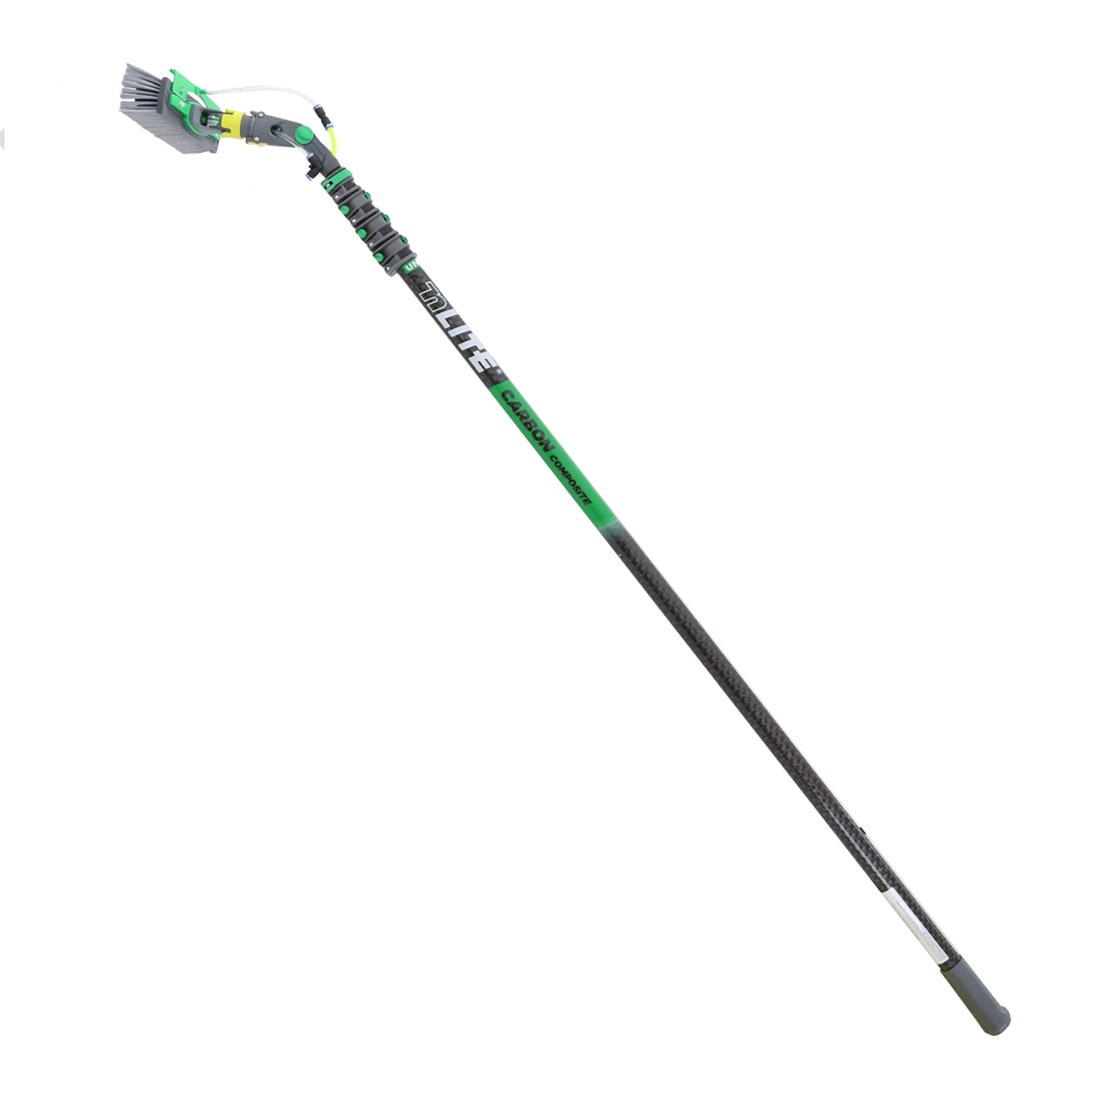 Unger nLITE Carbon Composite Water Fed Pole Kit 20 Foot - 11" Powerbrush Full View